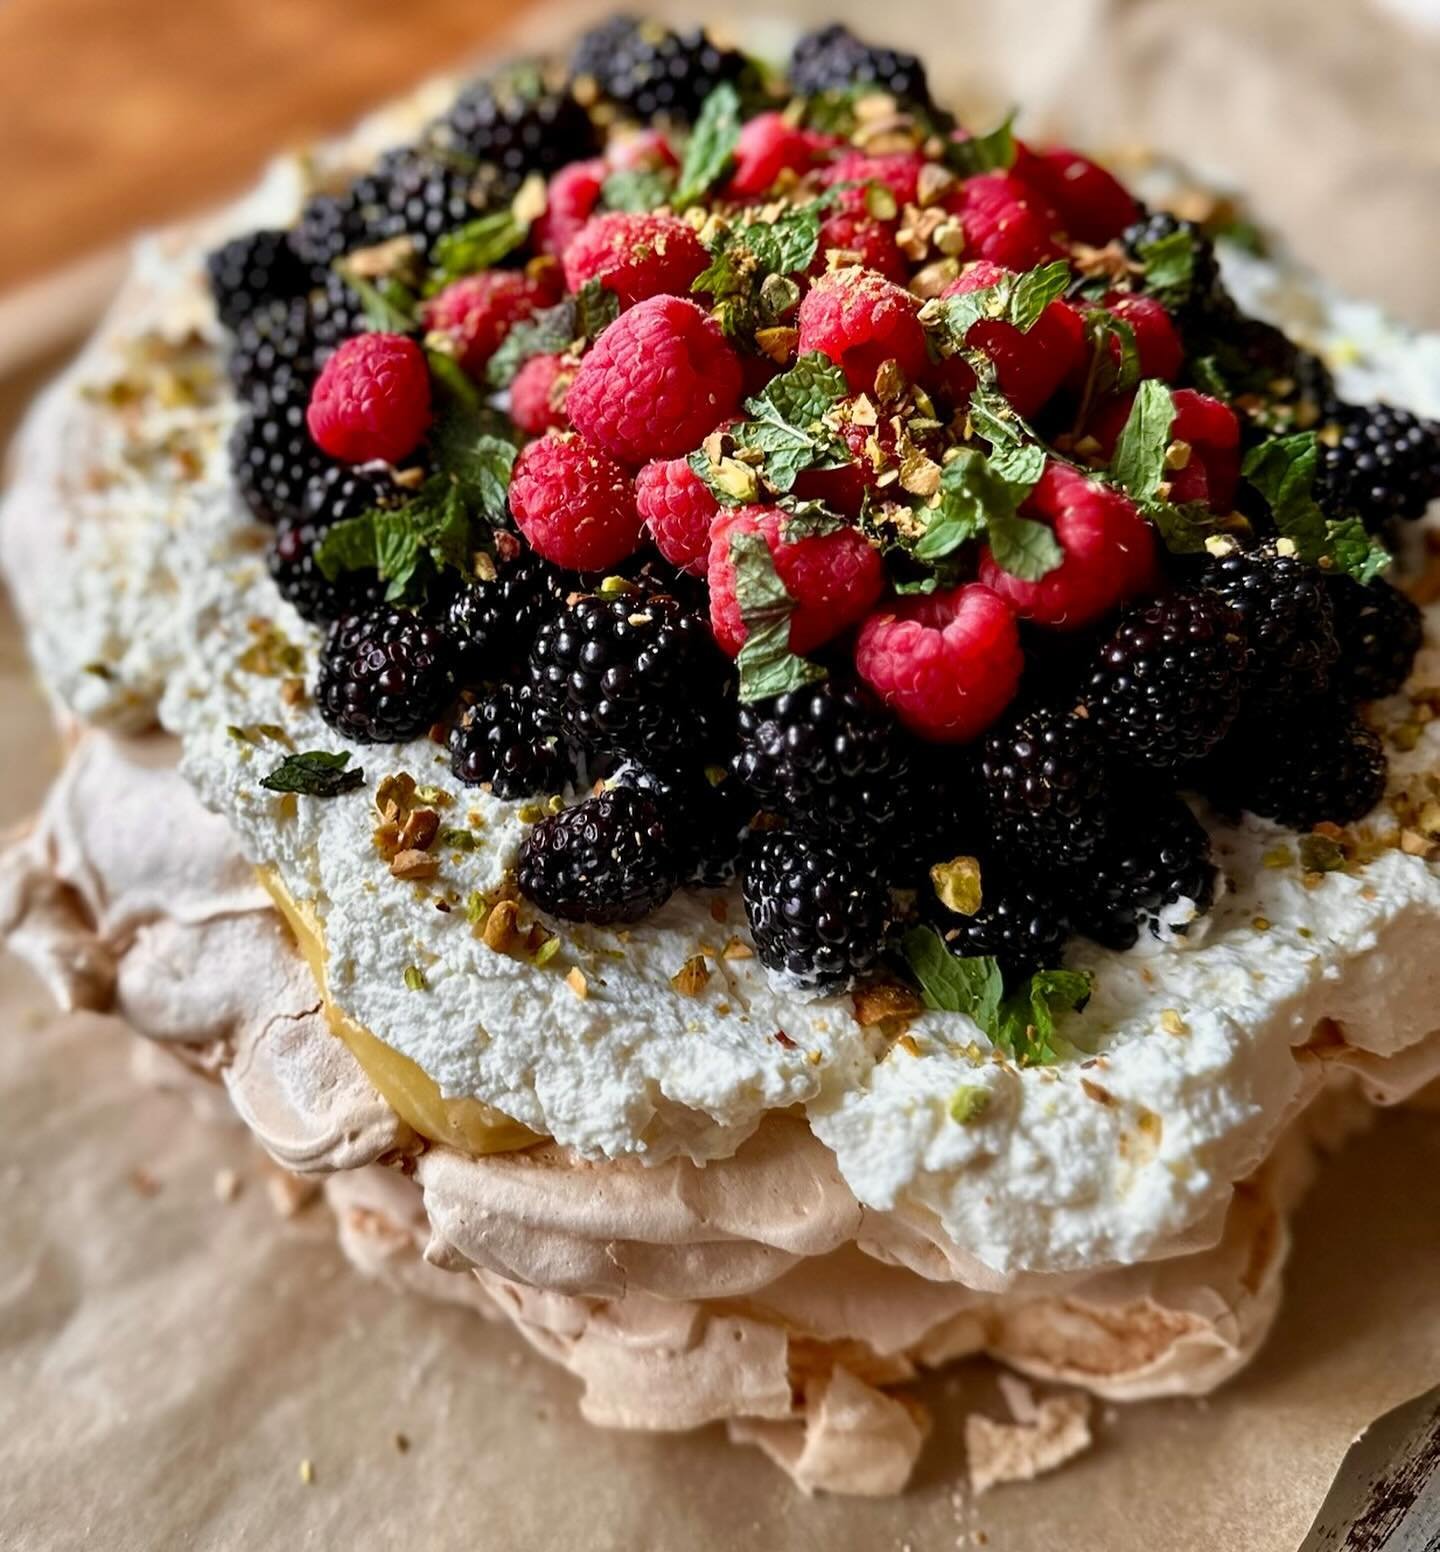 It&rsquo;s still Passover, and pavlova is still the most perfect dessert ever created. Layers of meringue, lemon curd, whipped cream, berries and pistachios. A little torn mint. Impossible to resist.